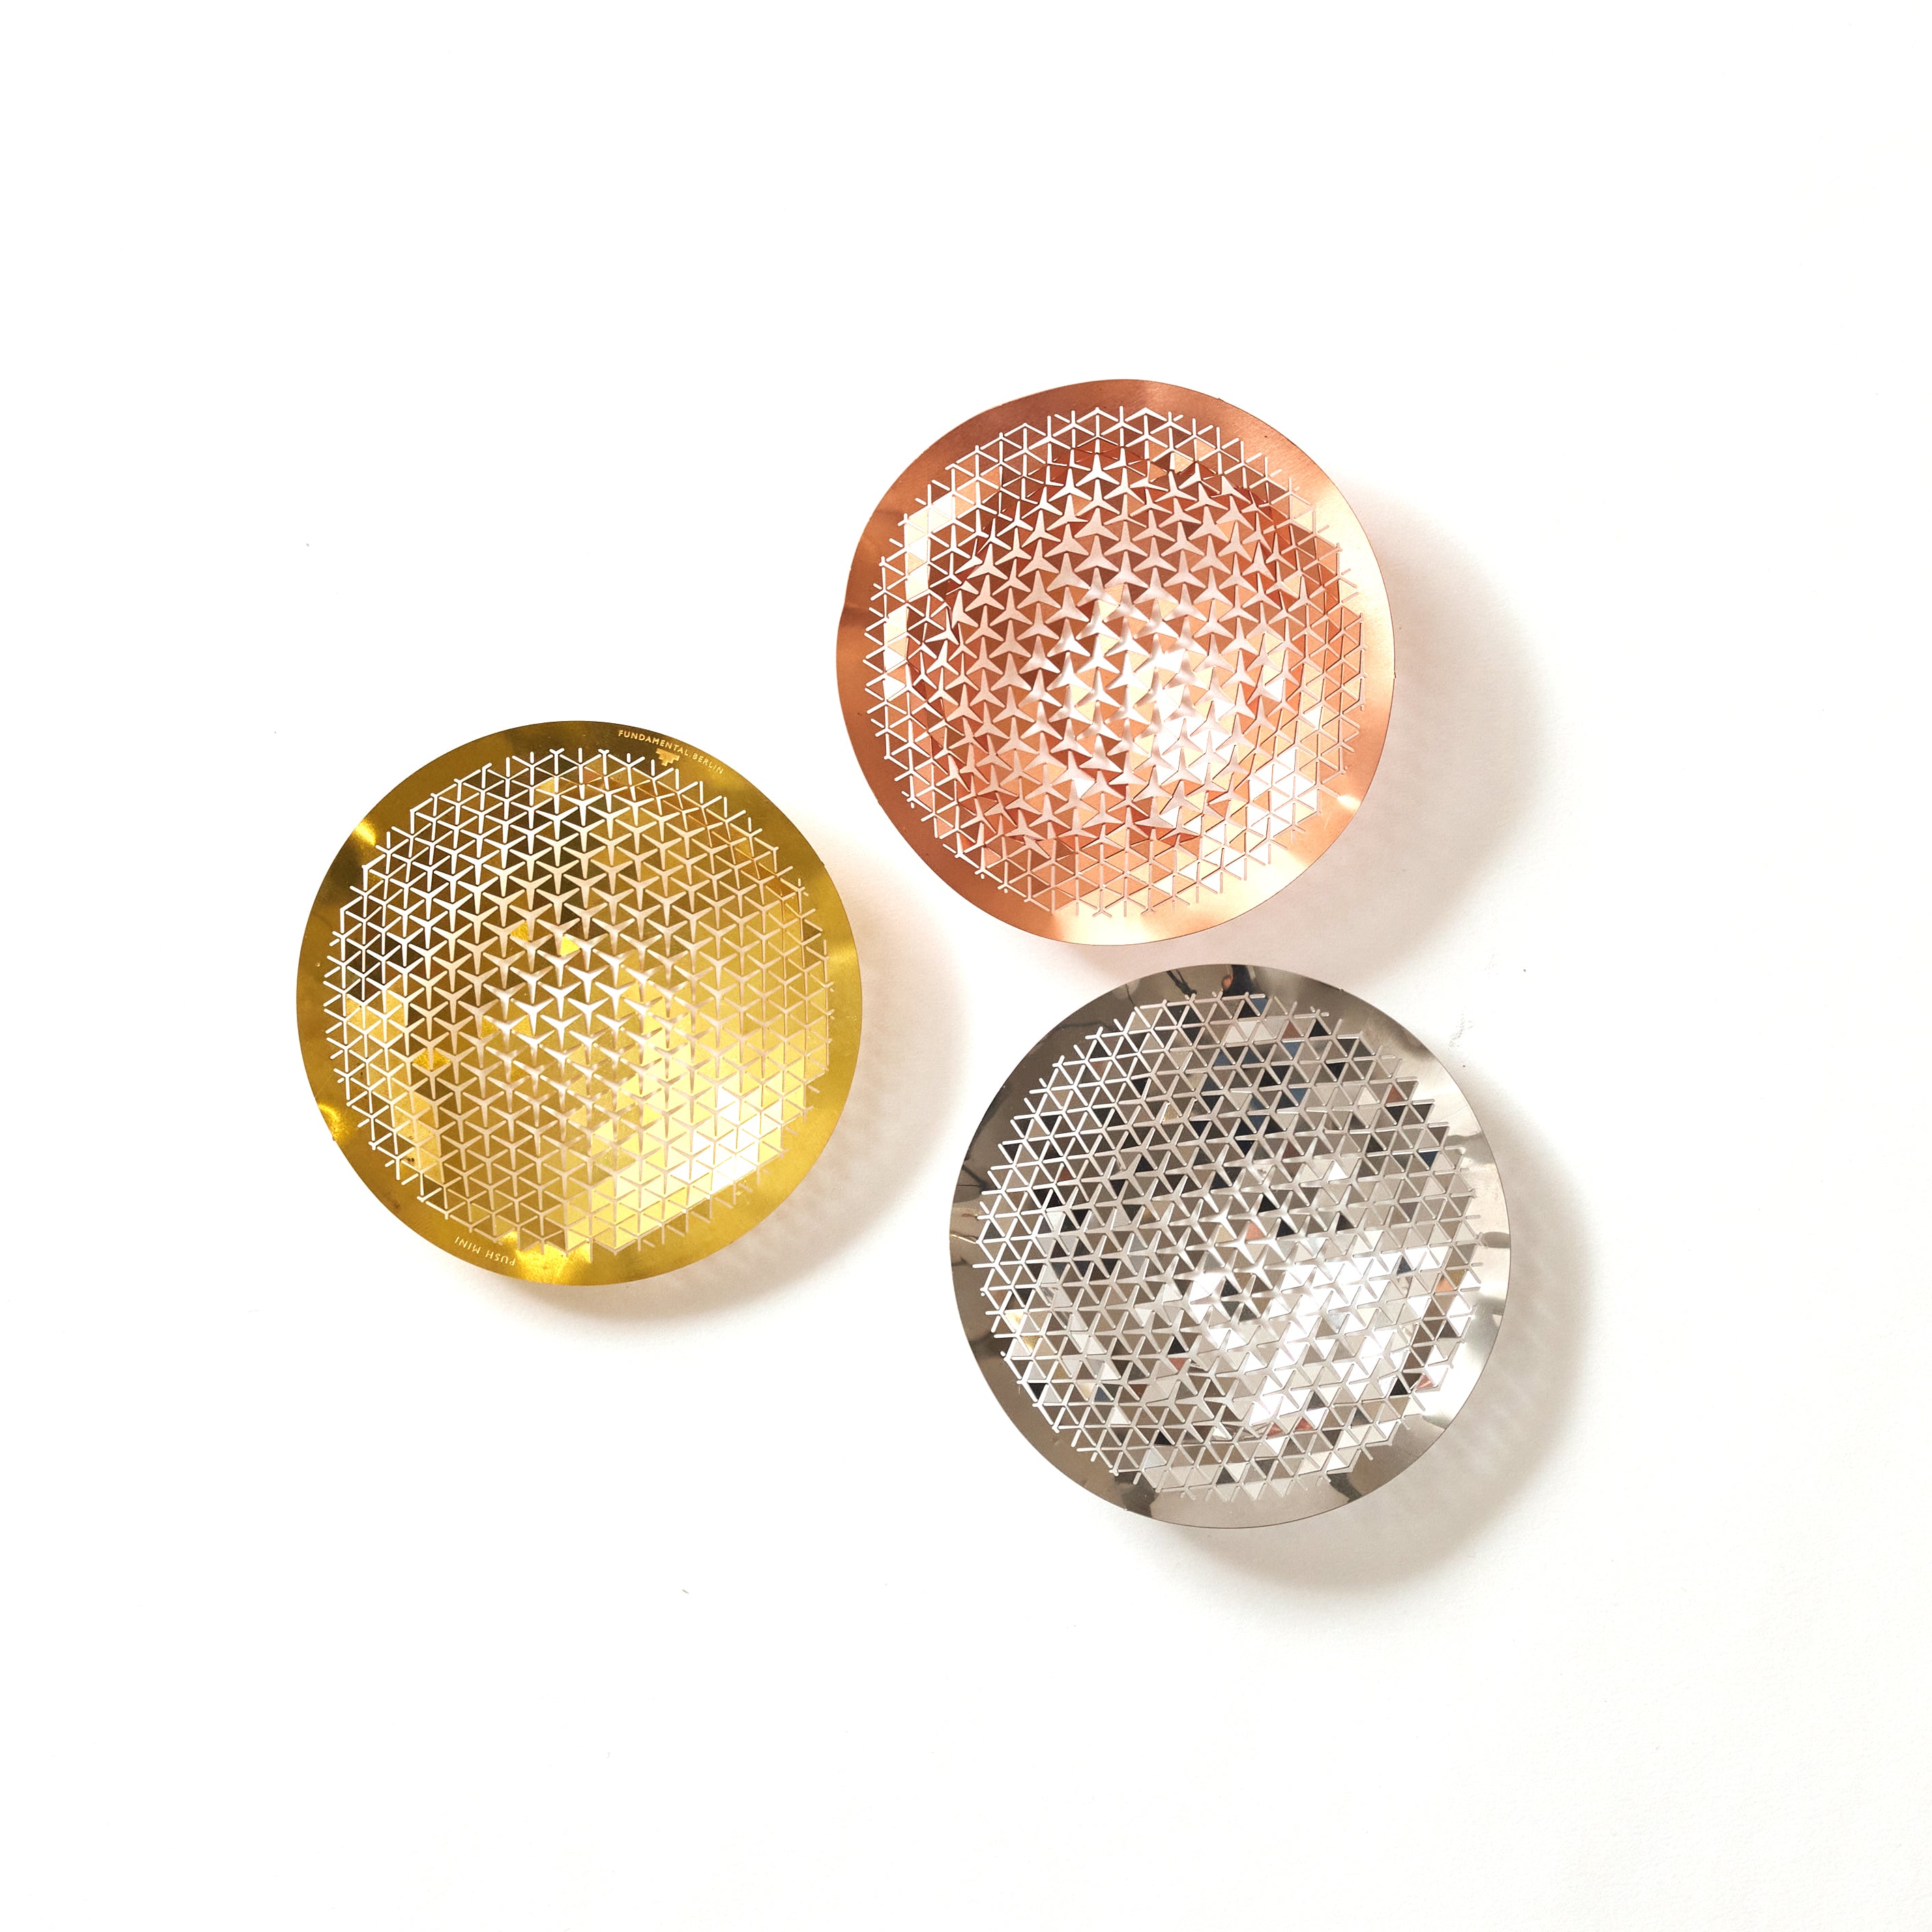 Set of three mini push bowls in metallic colors: gold, silver, and copper